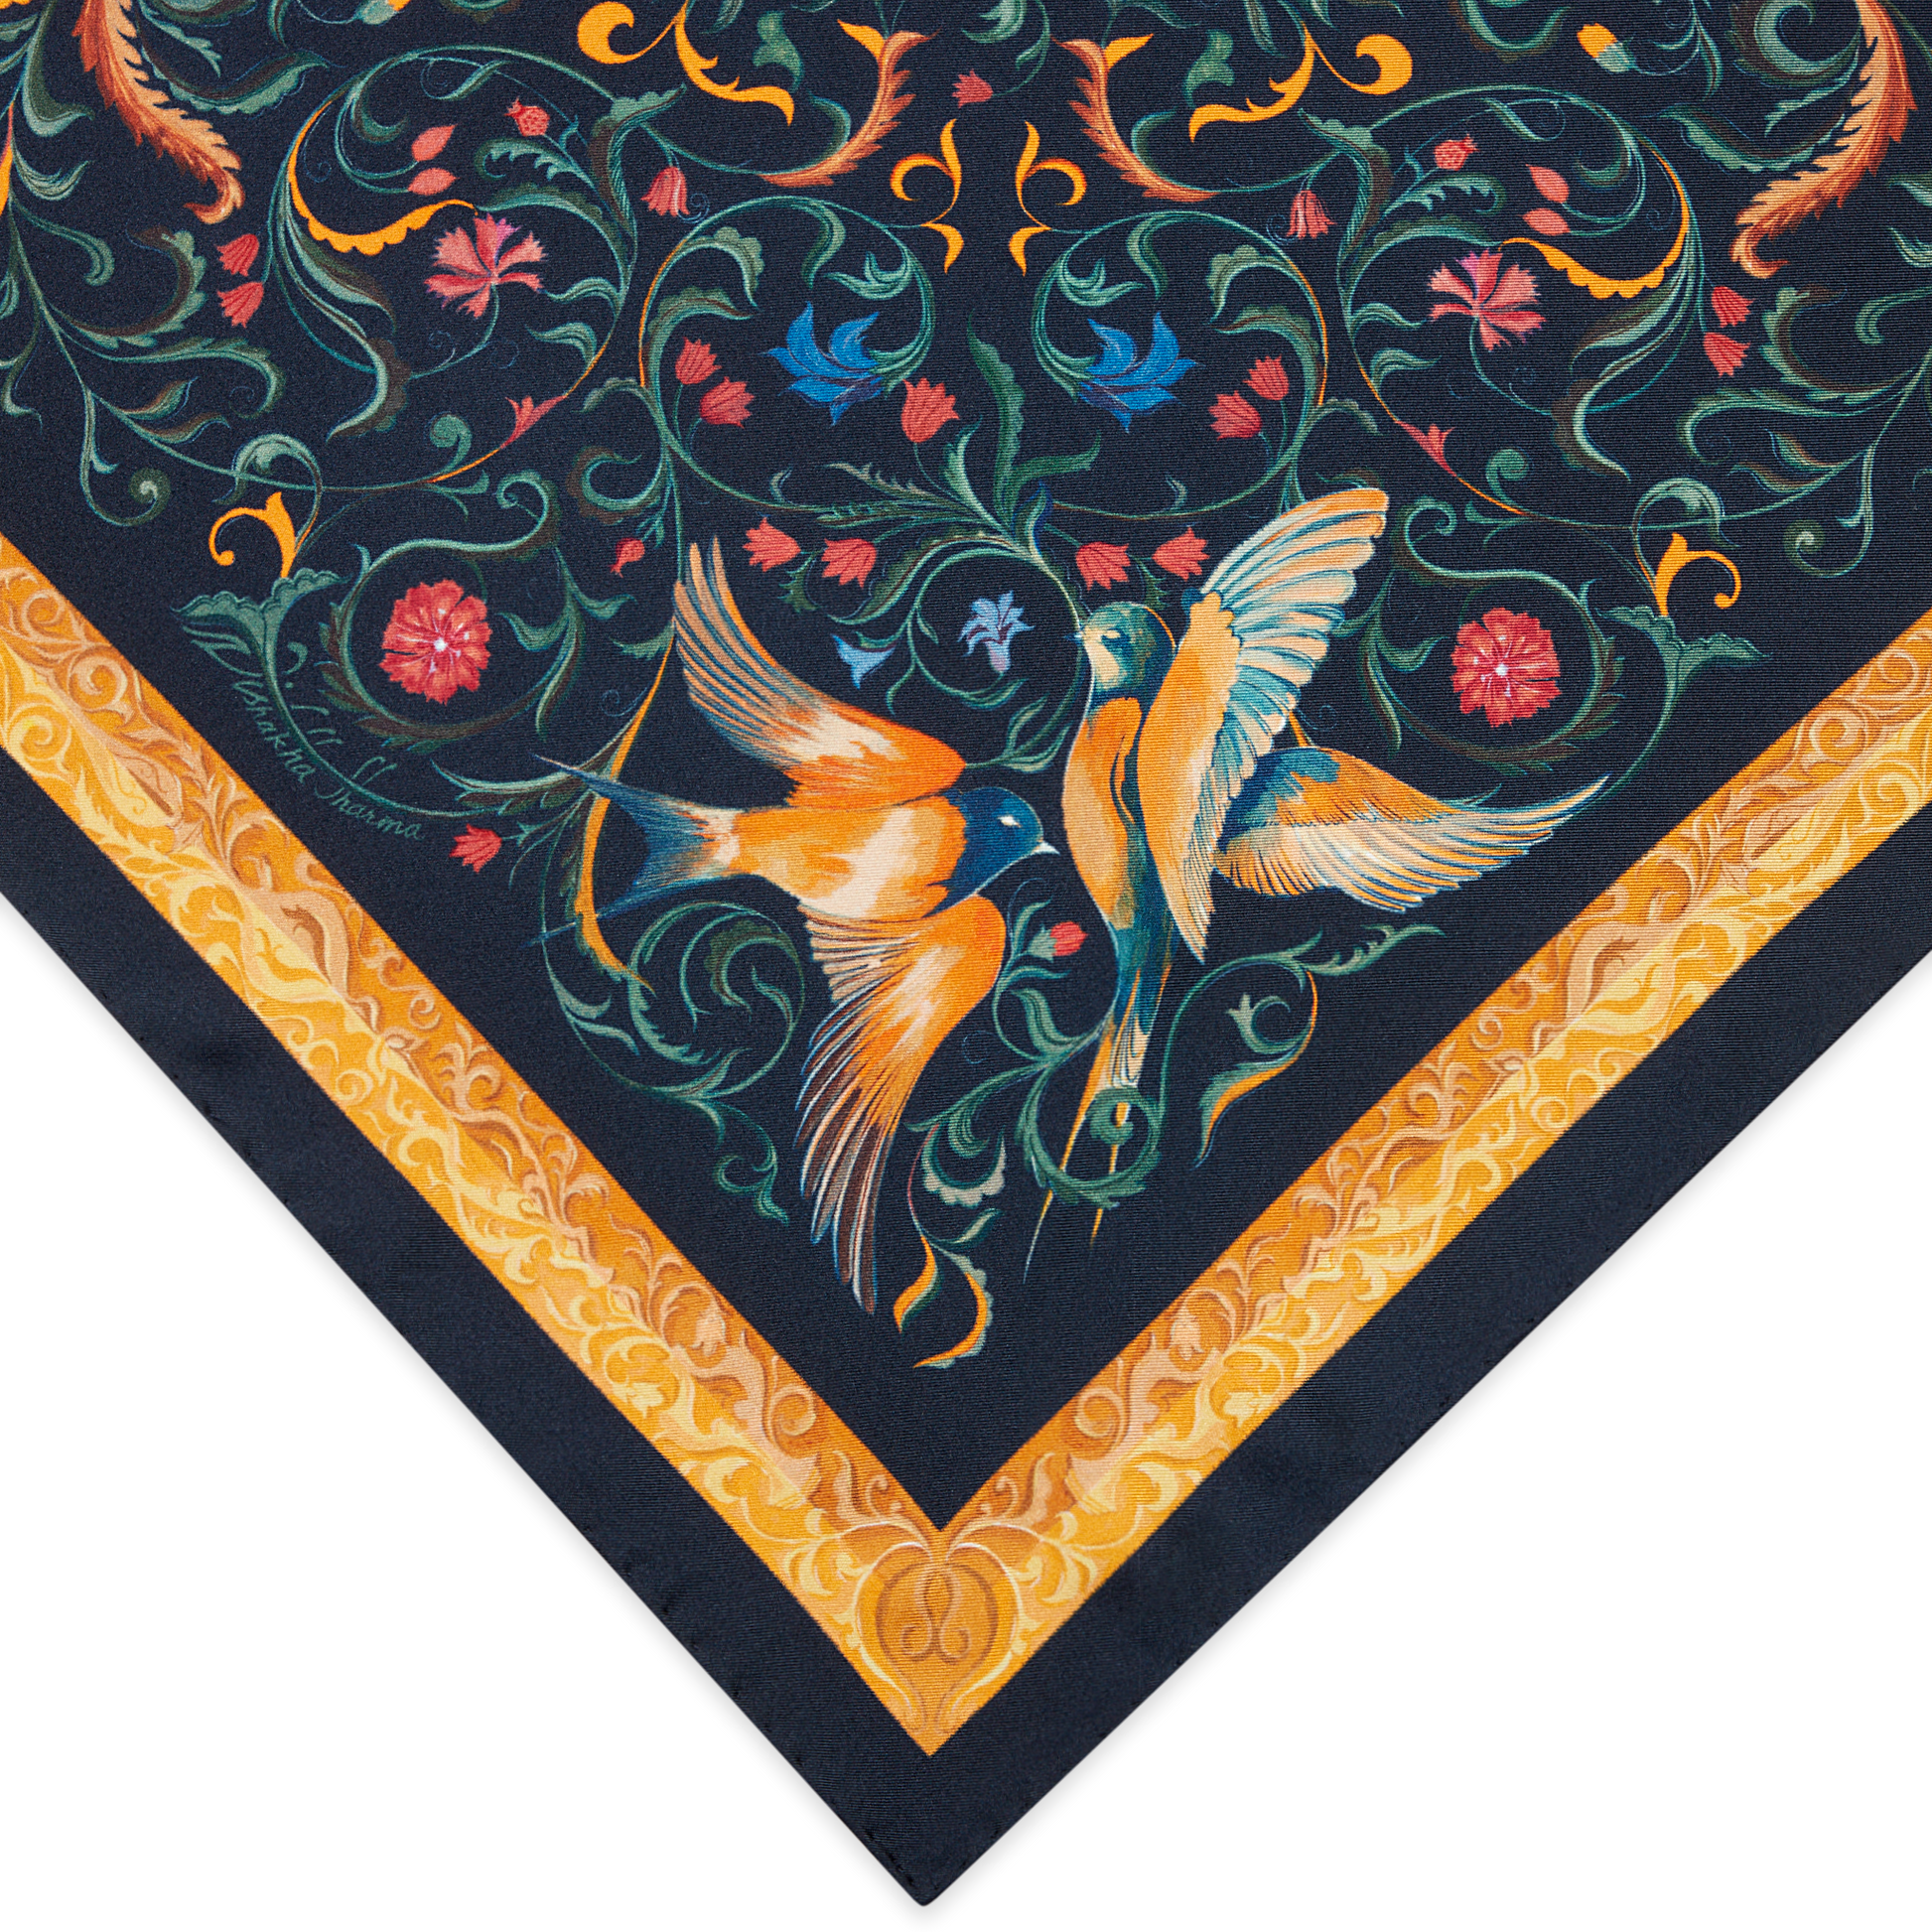 A 90mm silk scarf in a hand-painted print, inspired by the ornate ceiling of the Vienna State Opera.